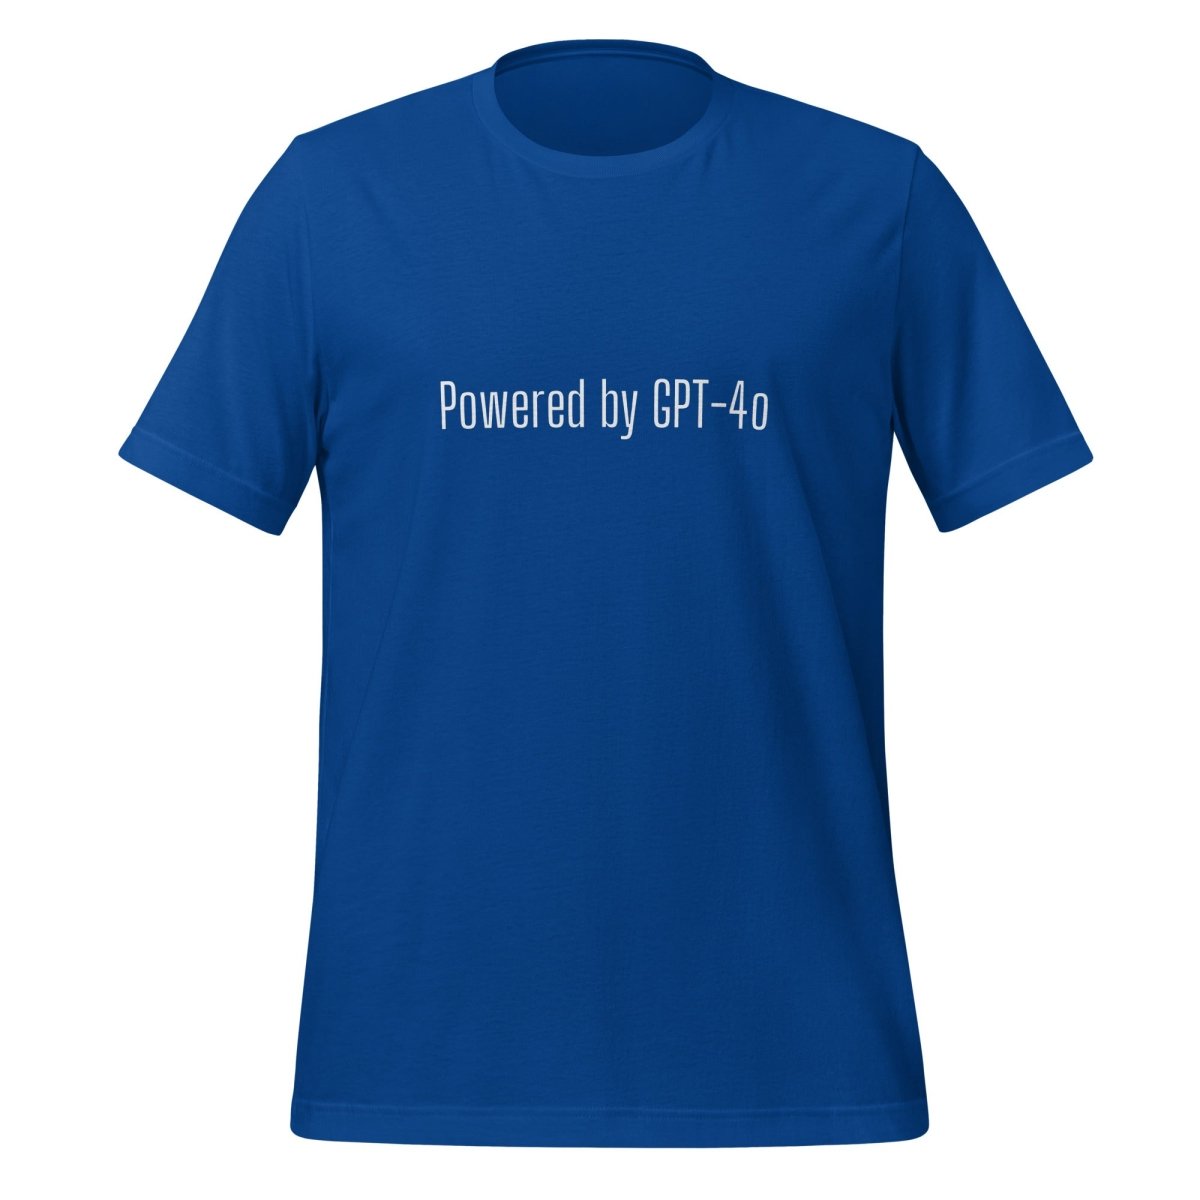 Powered by GPT - 4o T - Shirt 4 (unisex) - True Royal - AI Store